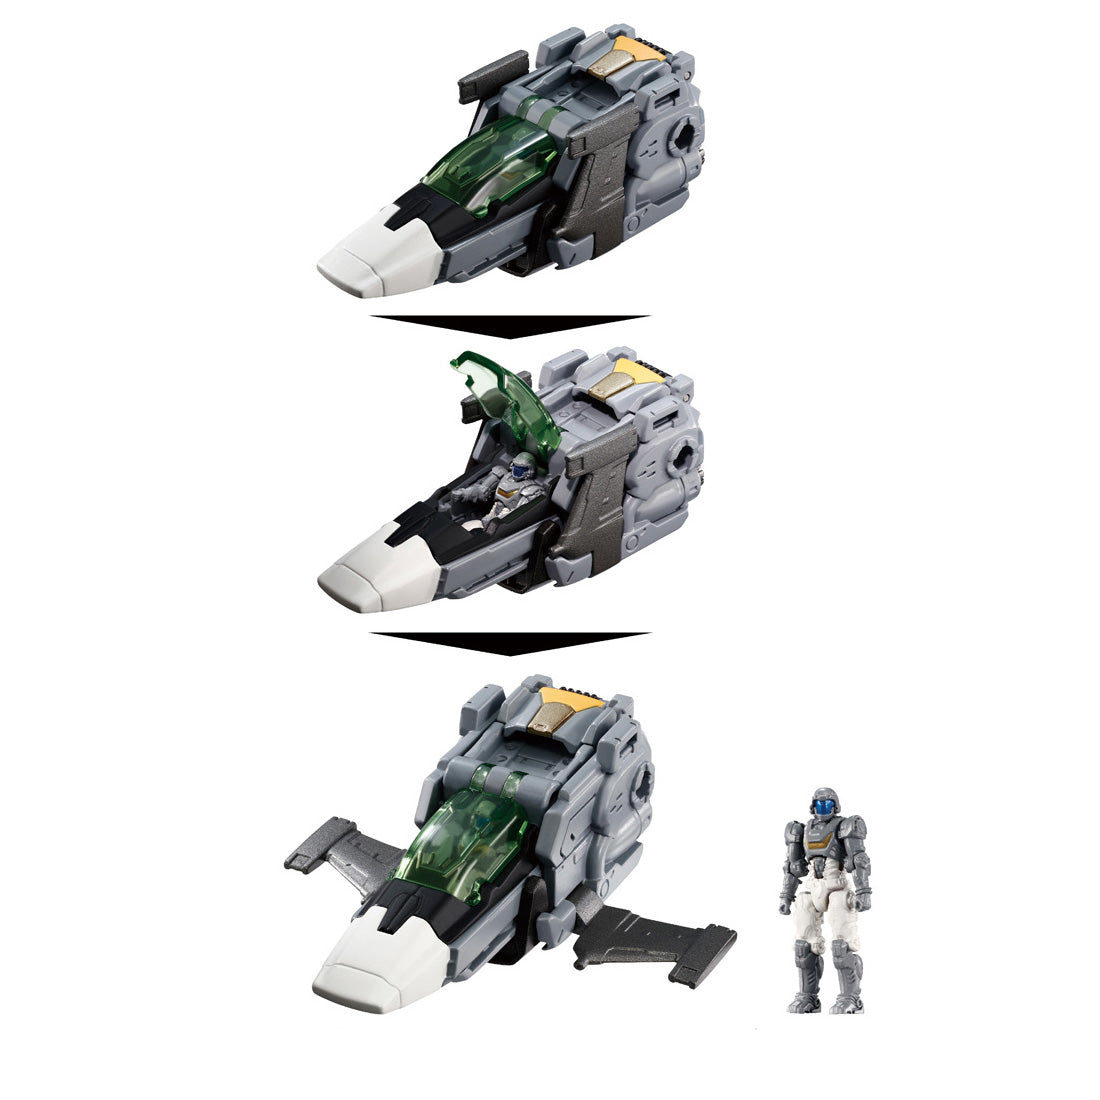 TakaraTomy - Diaclone - Tactical Mover Series - TM-24 - Hors Versaulter (F Thrust Unit) - Marvelous Toys